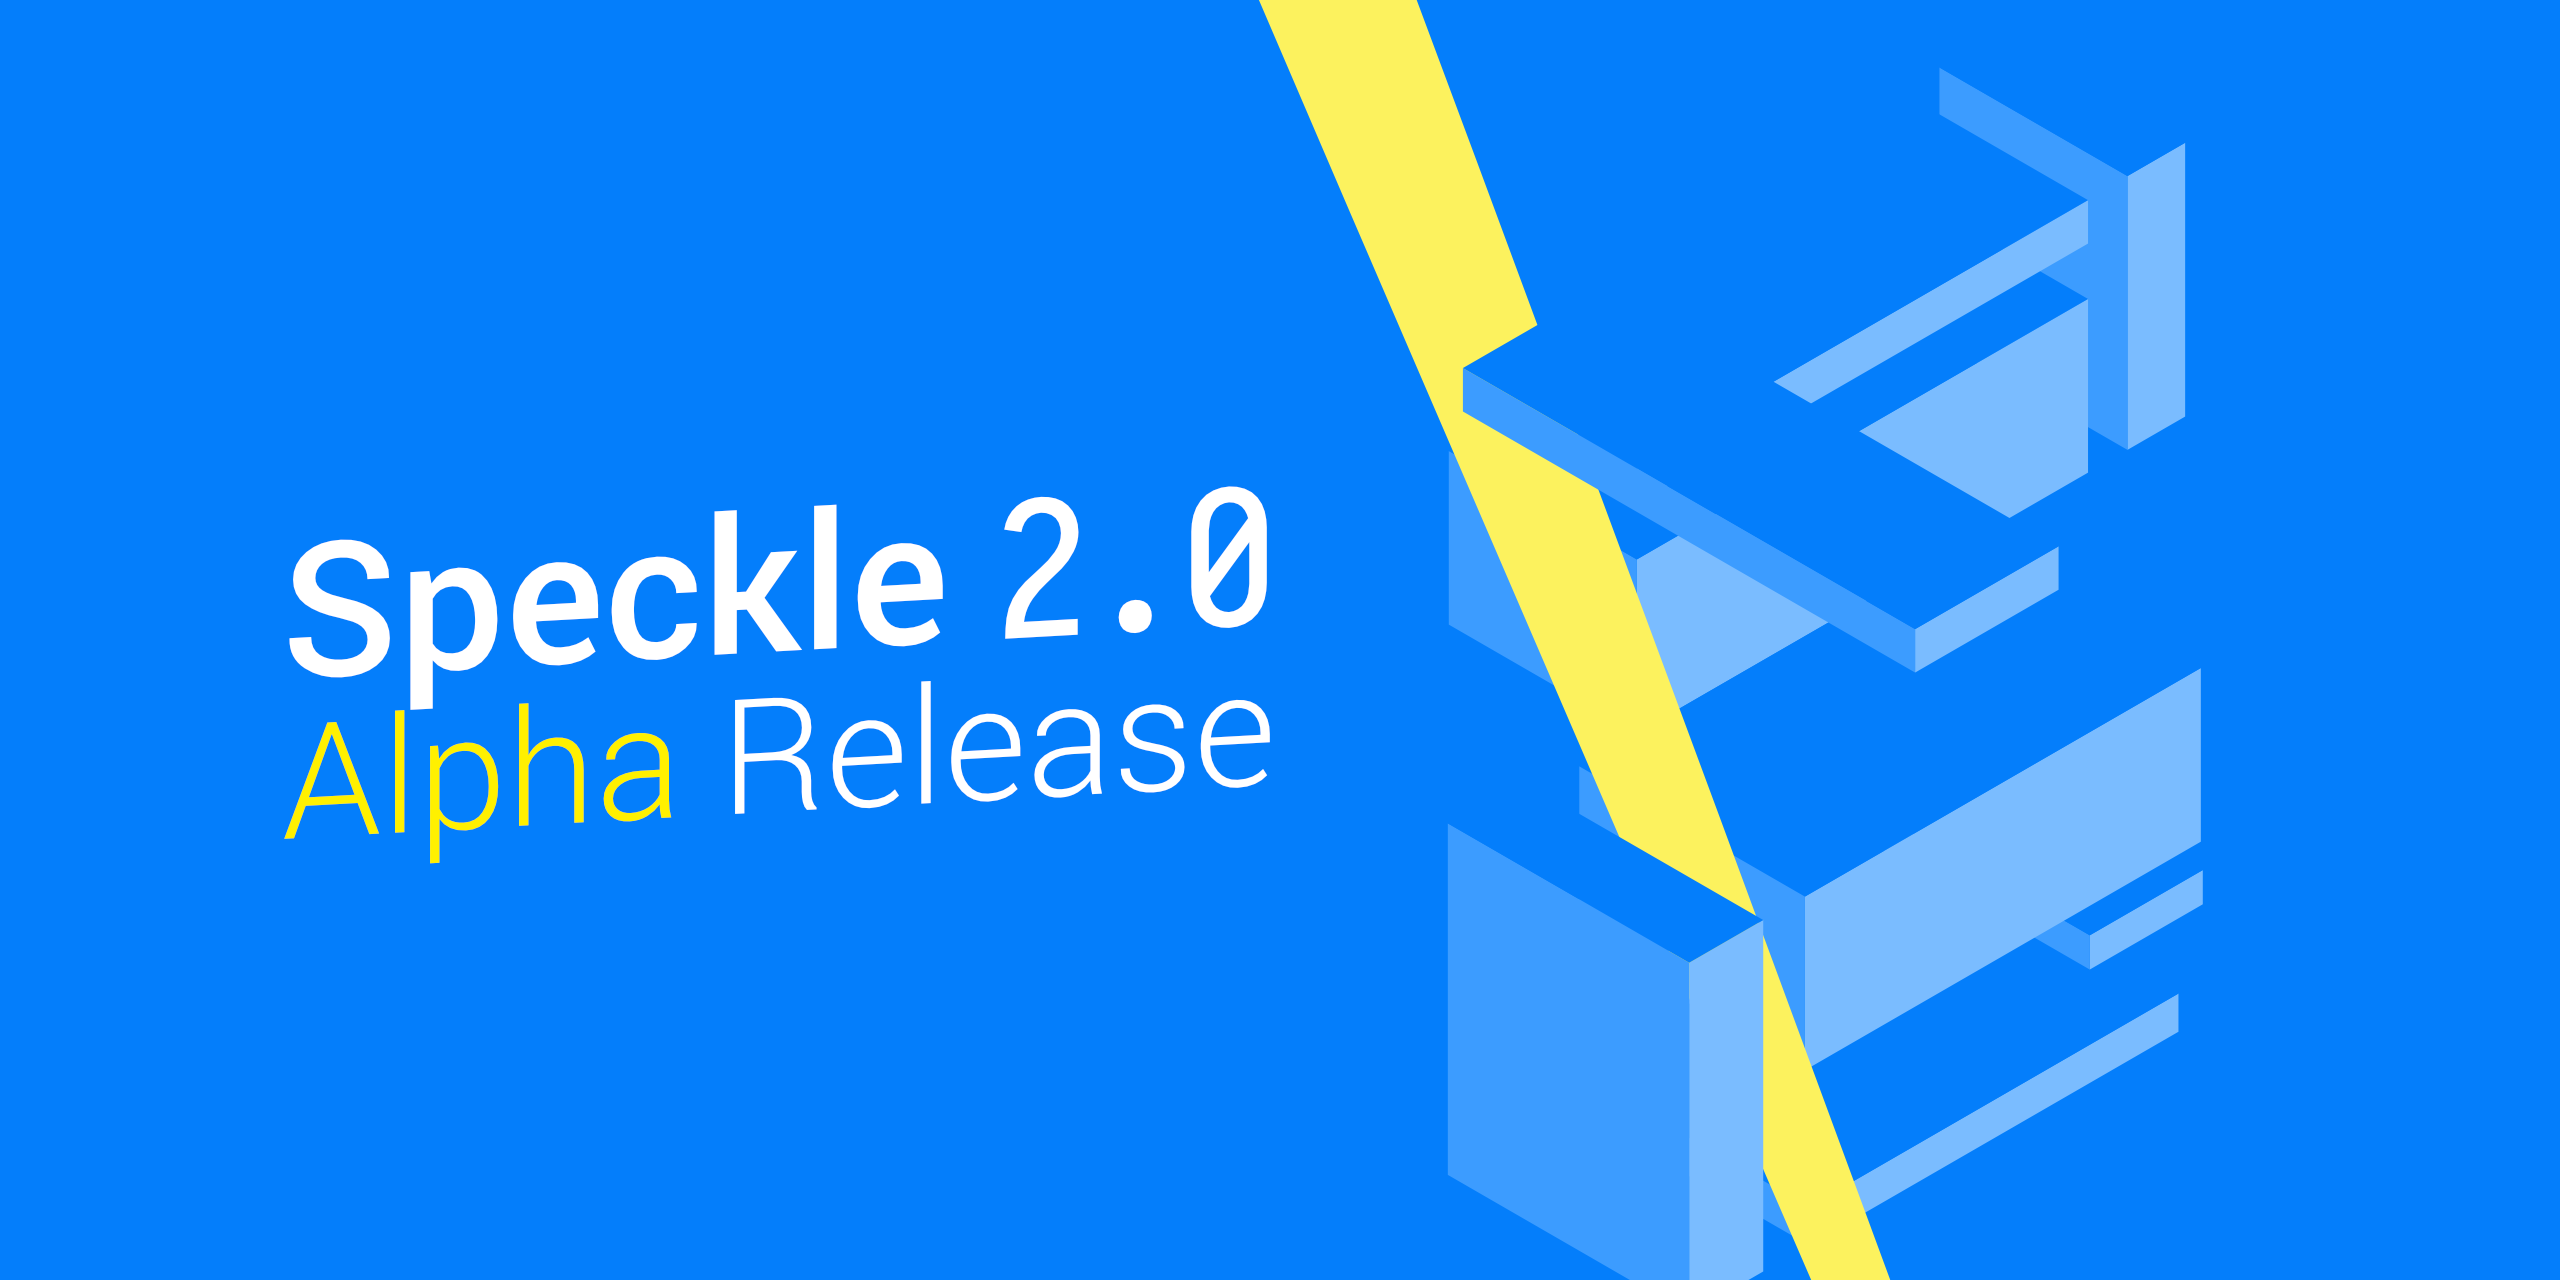 Speckle 2.0 Alpha Release